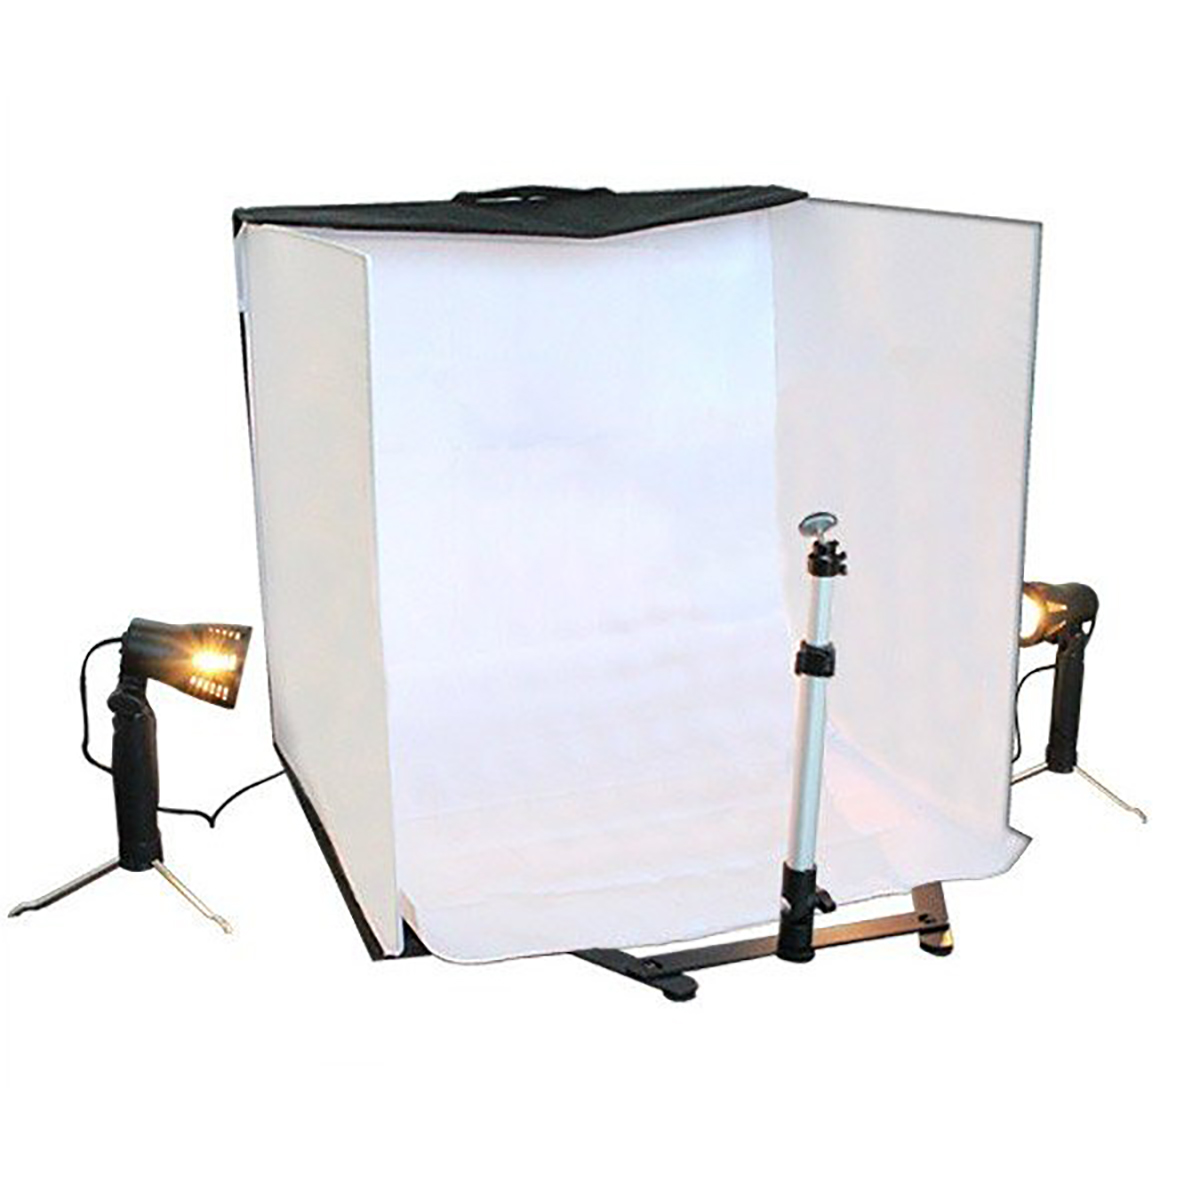  photographing kit photographing box Mini Studio photographing Studio 8 point set light socket three with legs WEIMALL